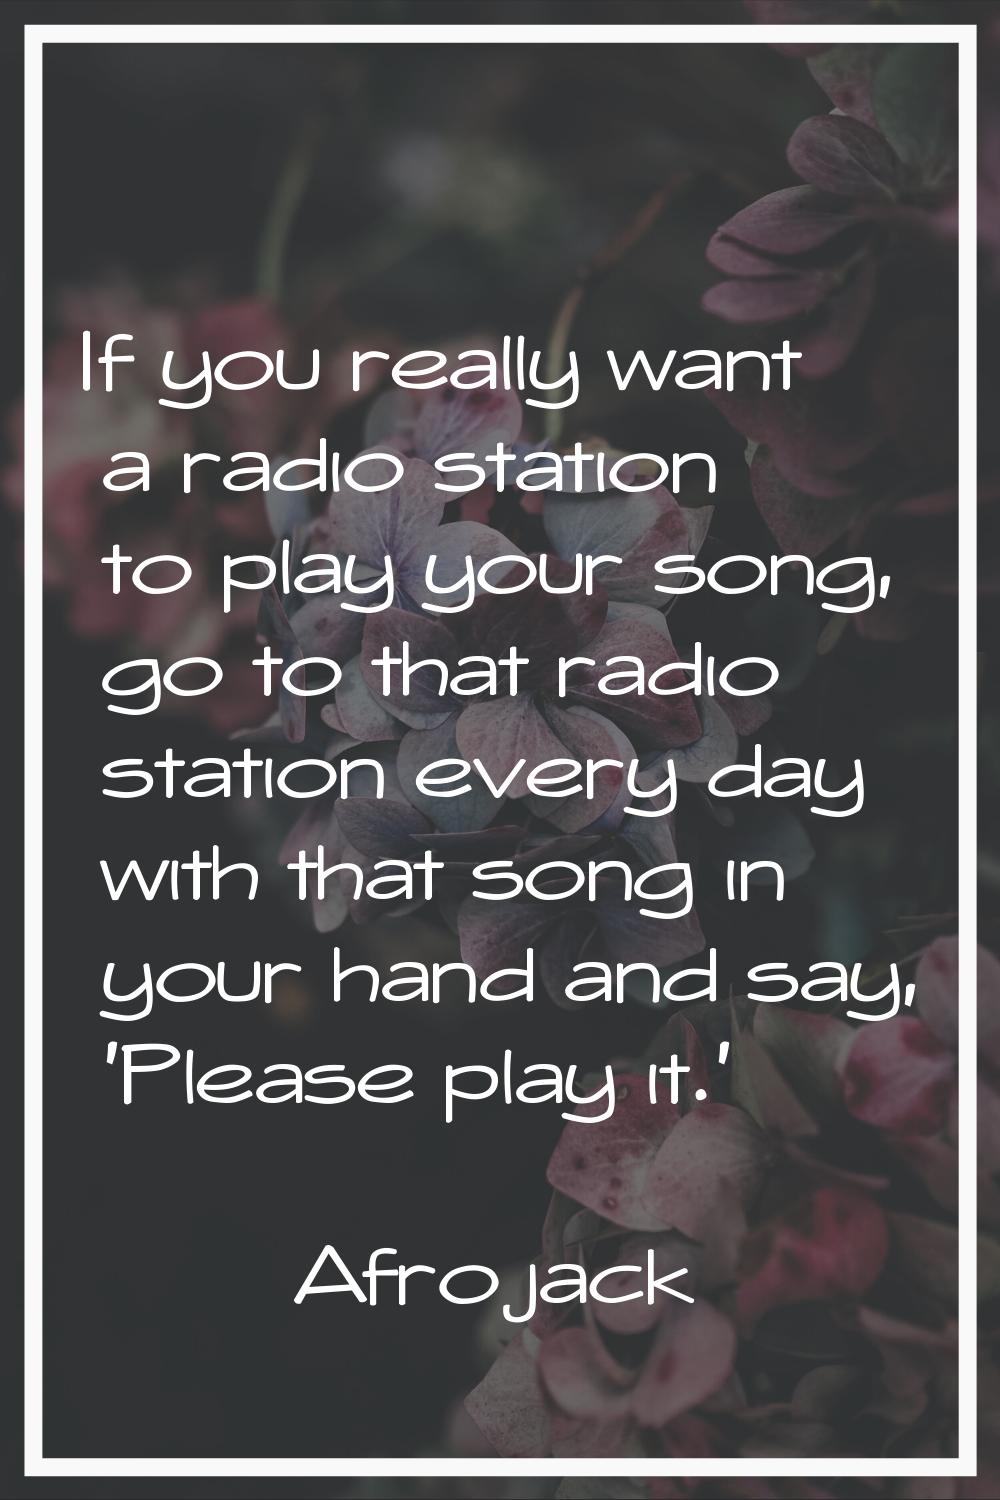 If you really want a radio station to play your song, go to that radio station every day with that 